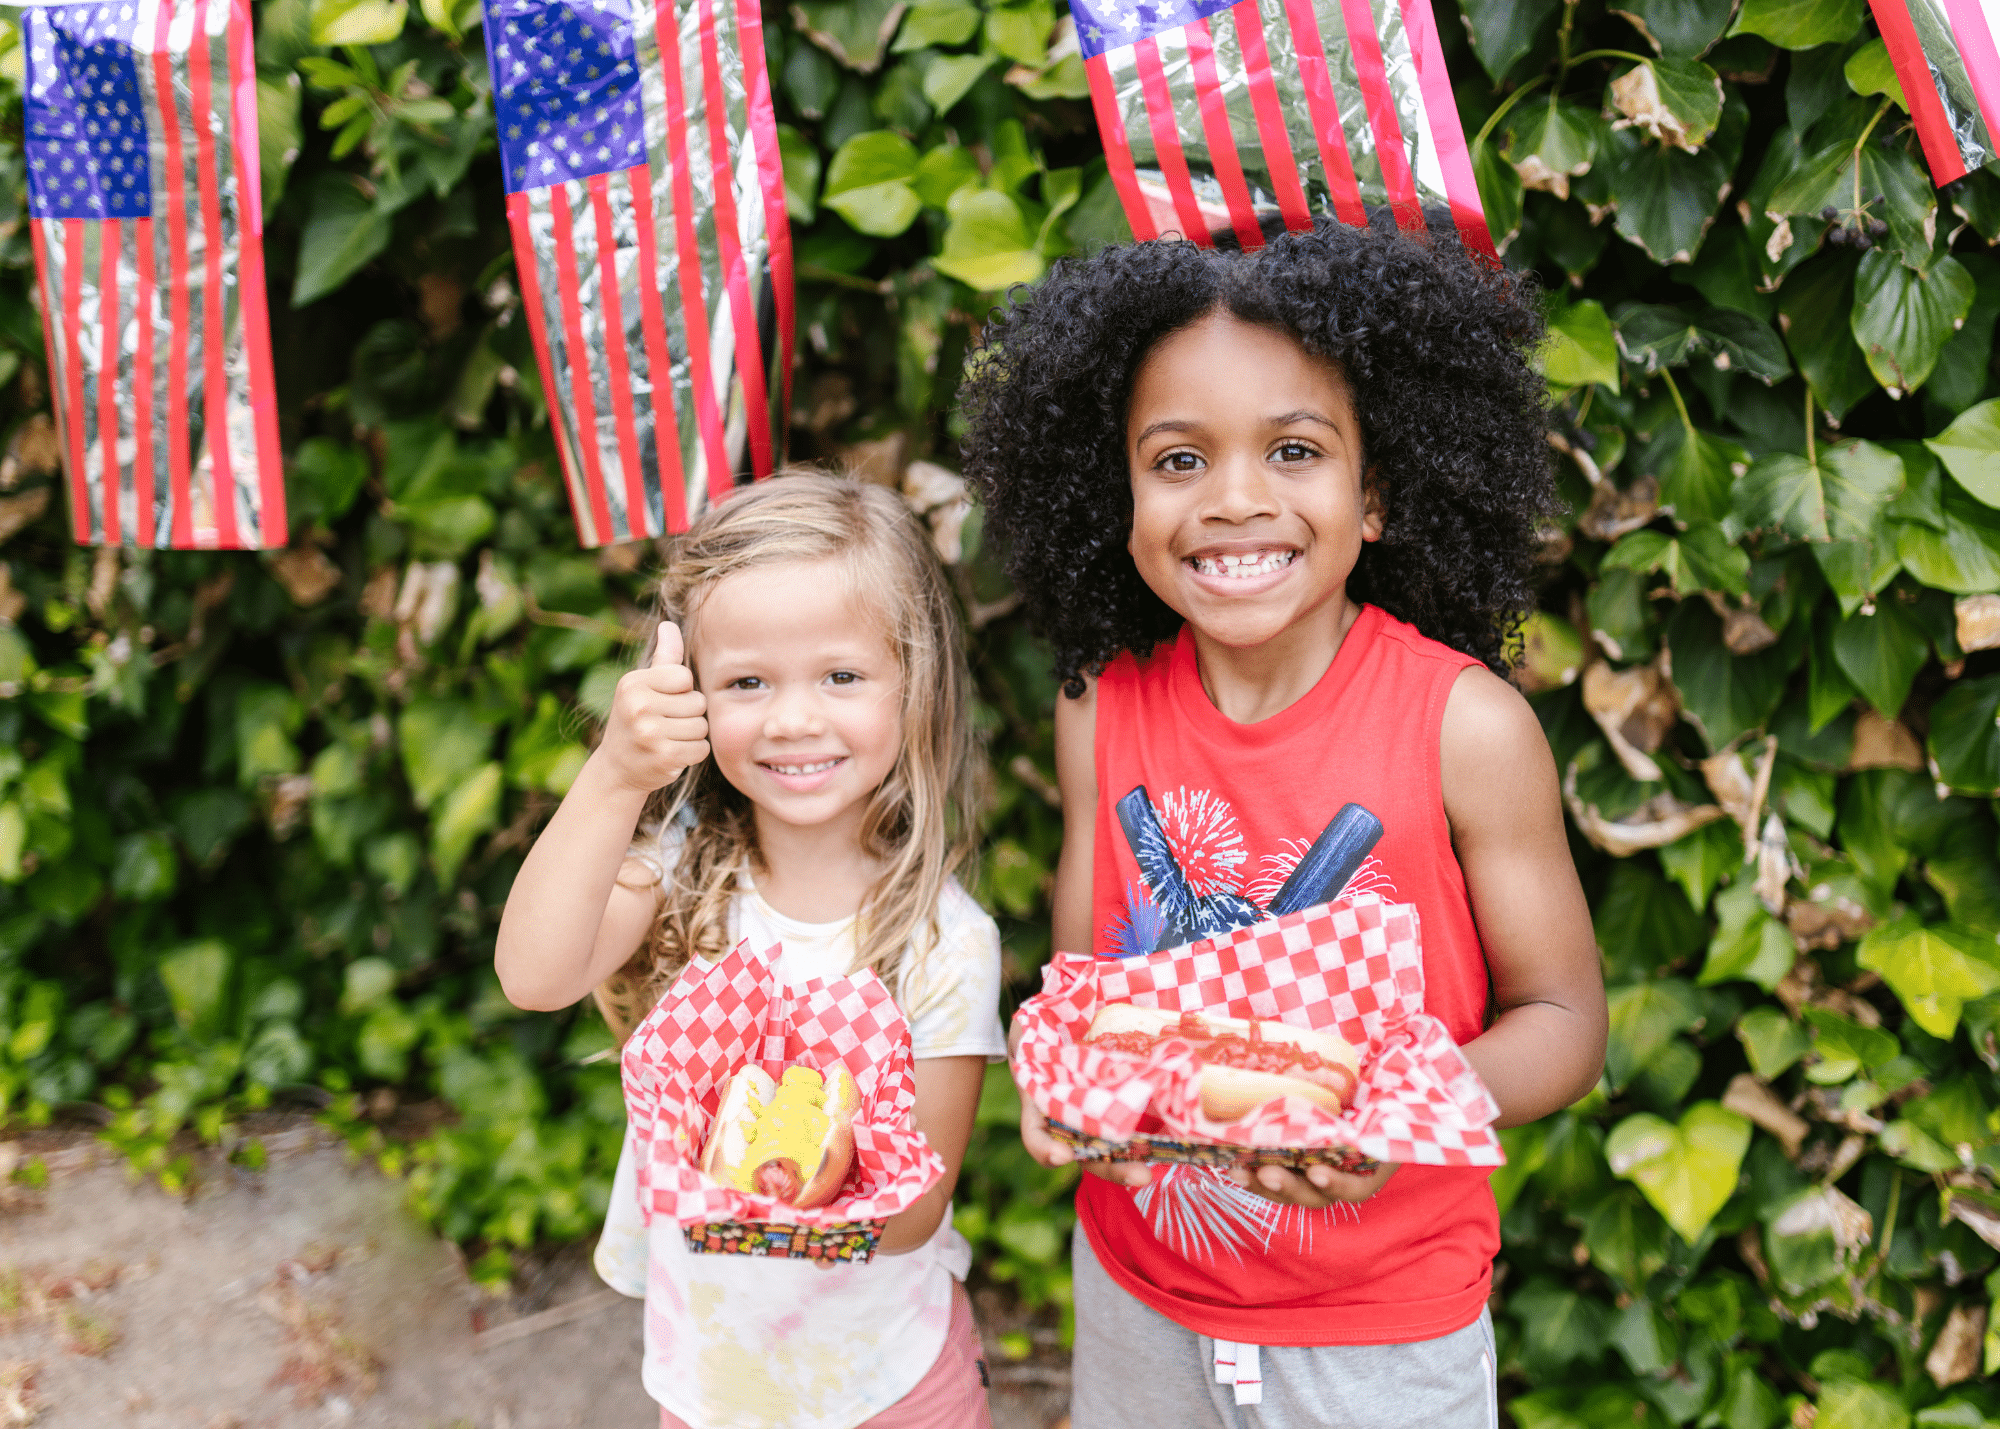 Kids celebrating Fourth of July safely and avoiding a visit to a kids urgent care